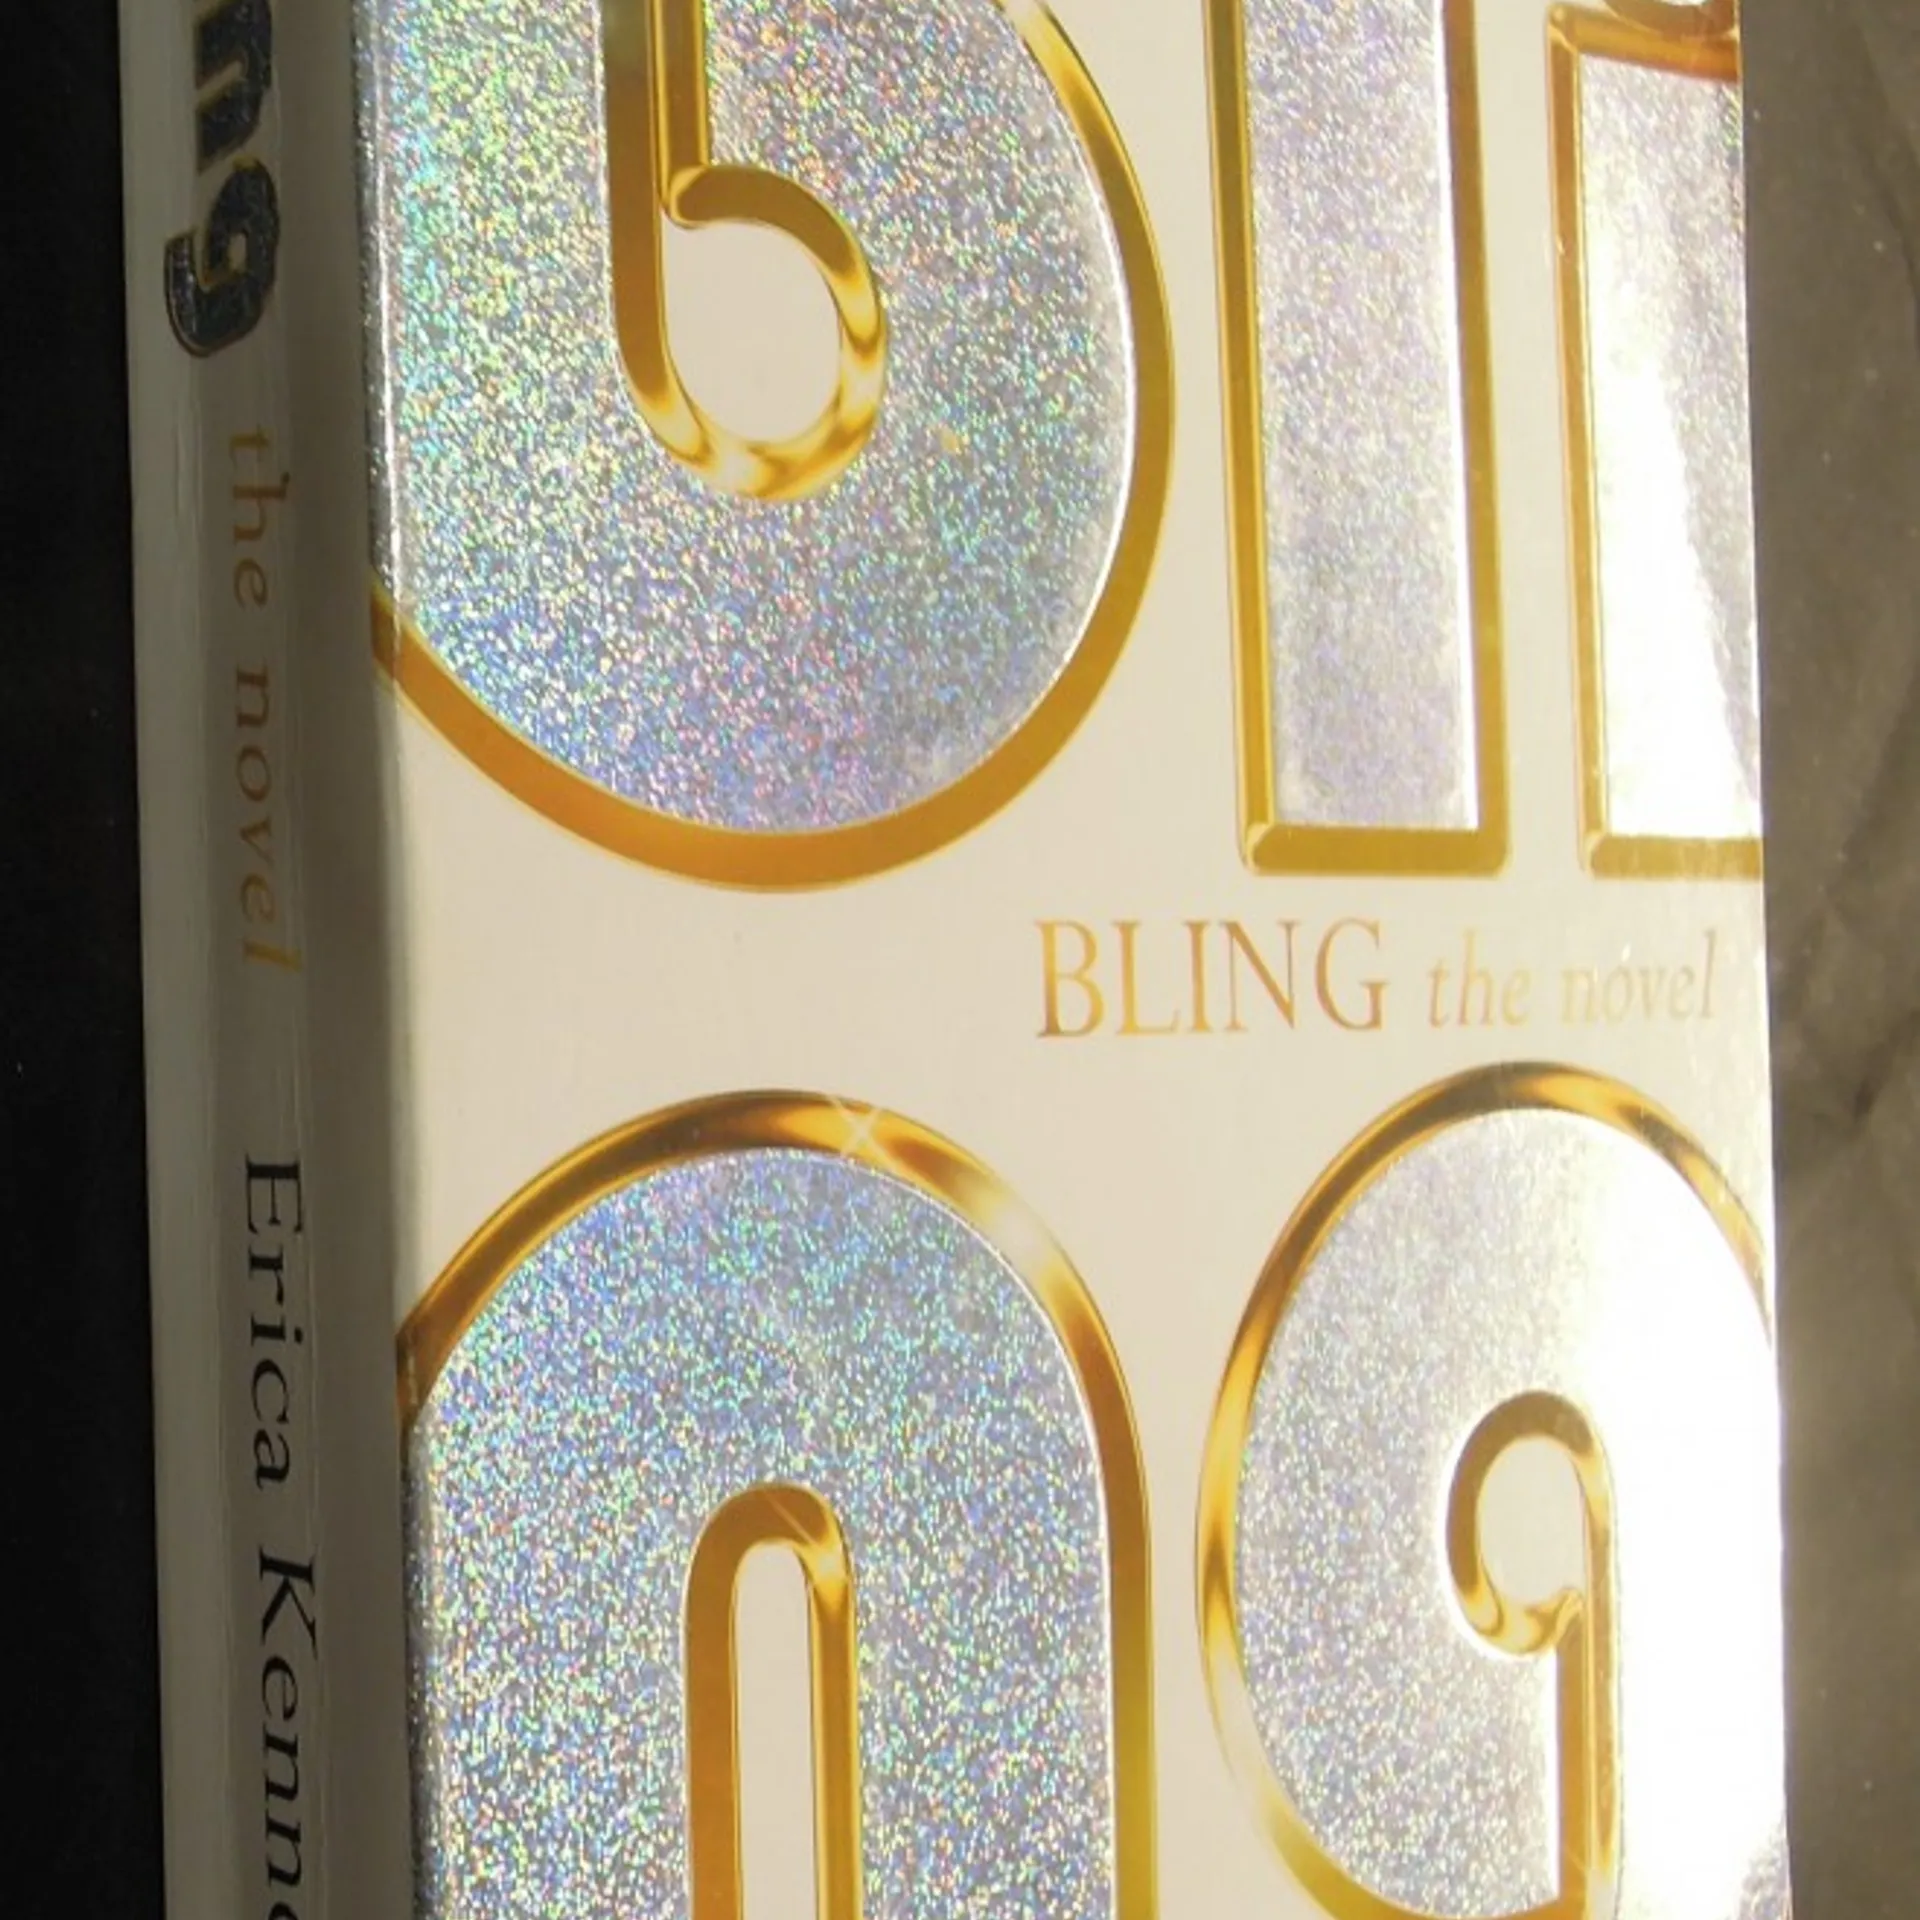 Bling by Erica Kennedy